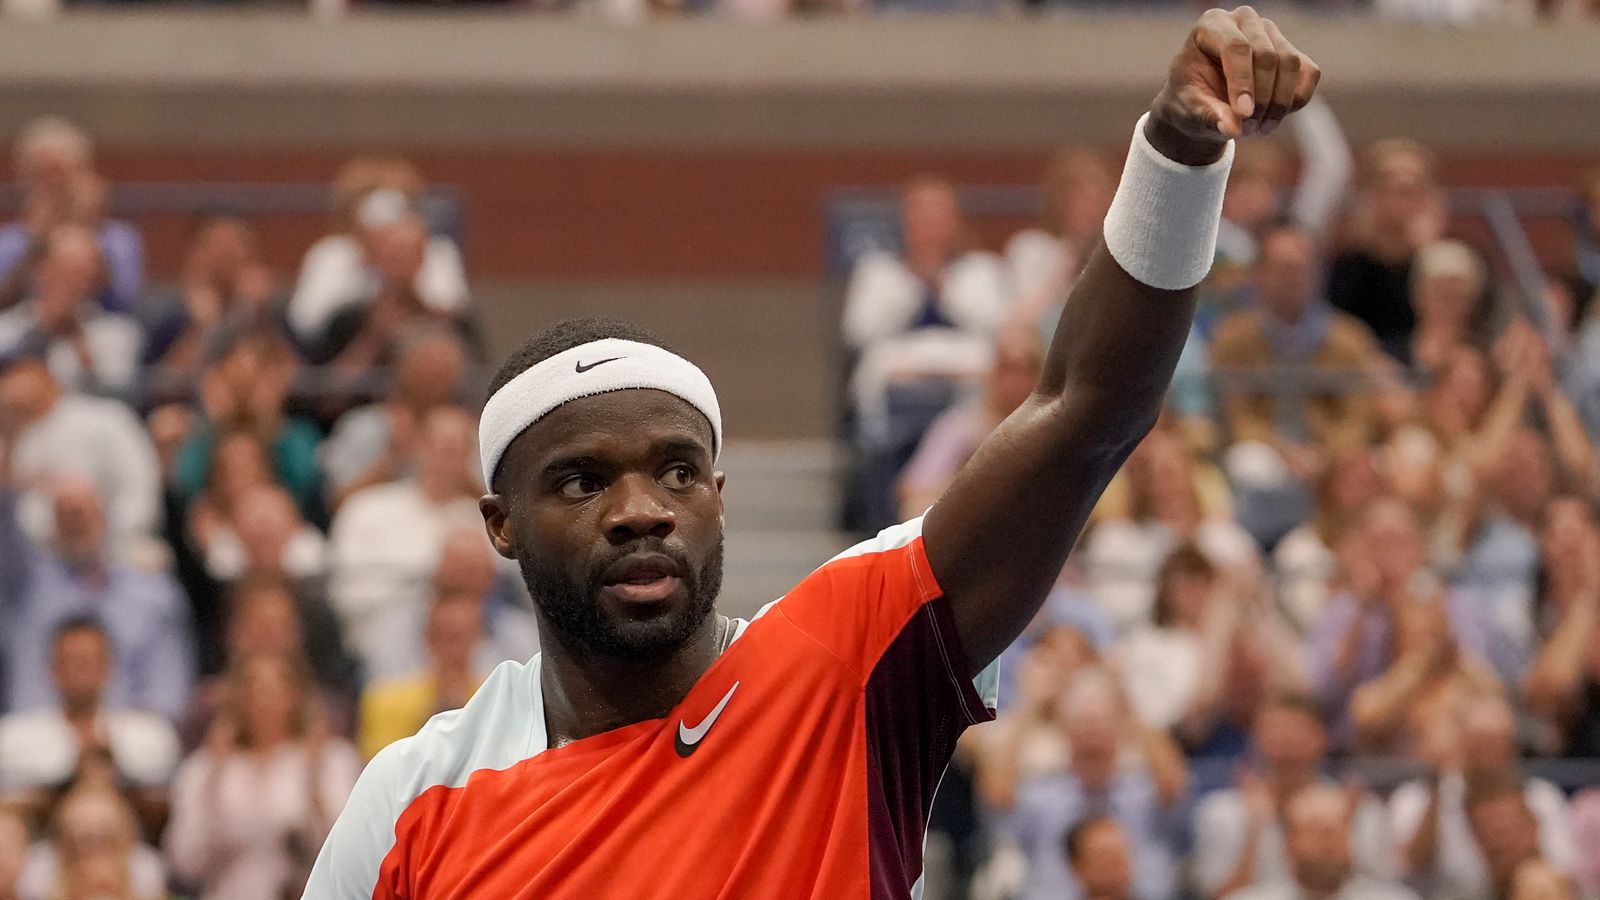 US Open: Frances Tiafoe through to a Grand Slam semi-final on home soil after beating Andrey Rublev